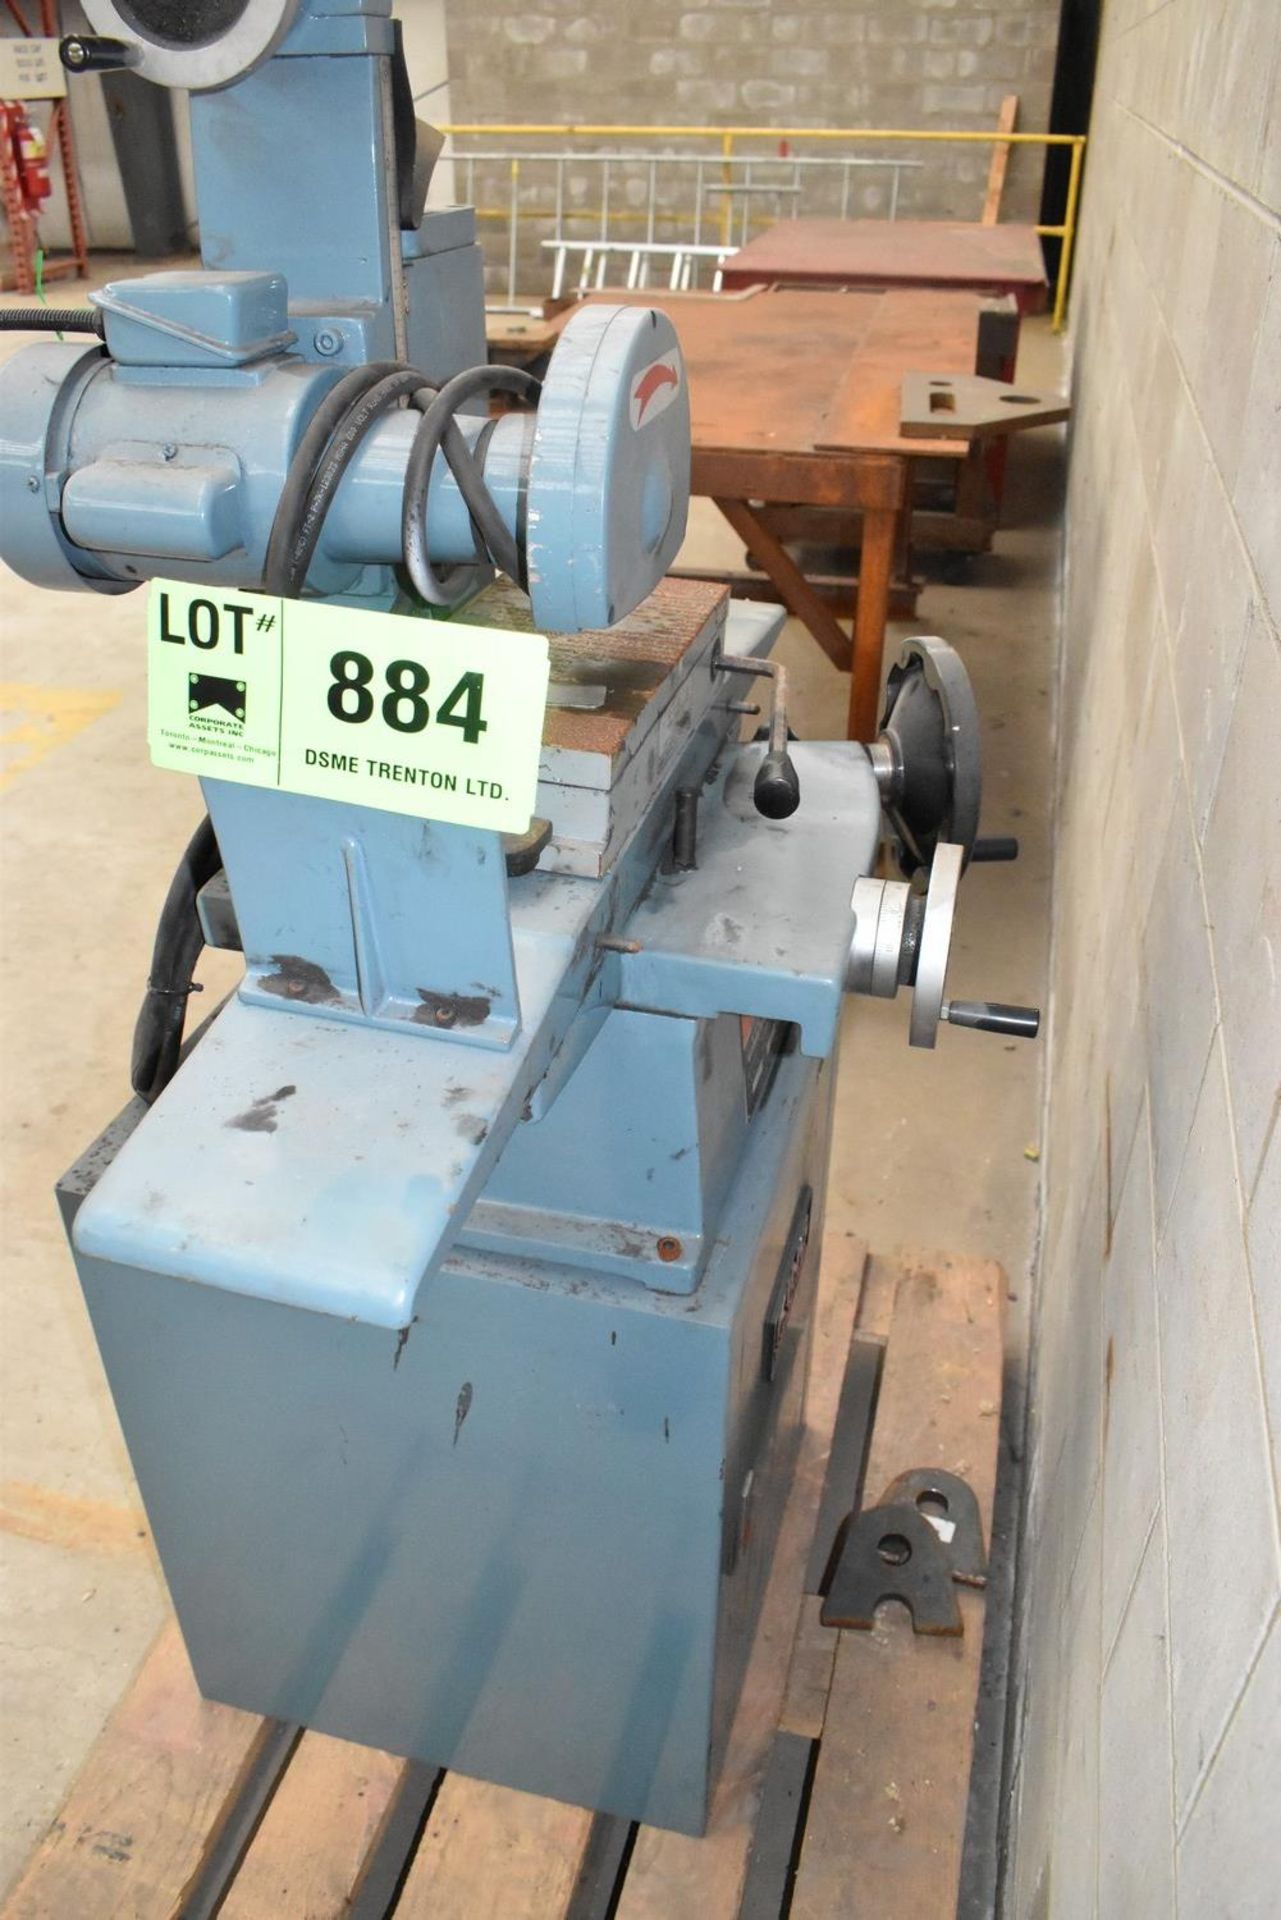 KING (2012) 6"X12" CONVENTIONAL SURFACE GRINDER, S/N 11989 - Image 2 of 3